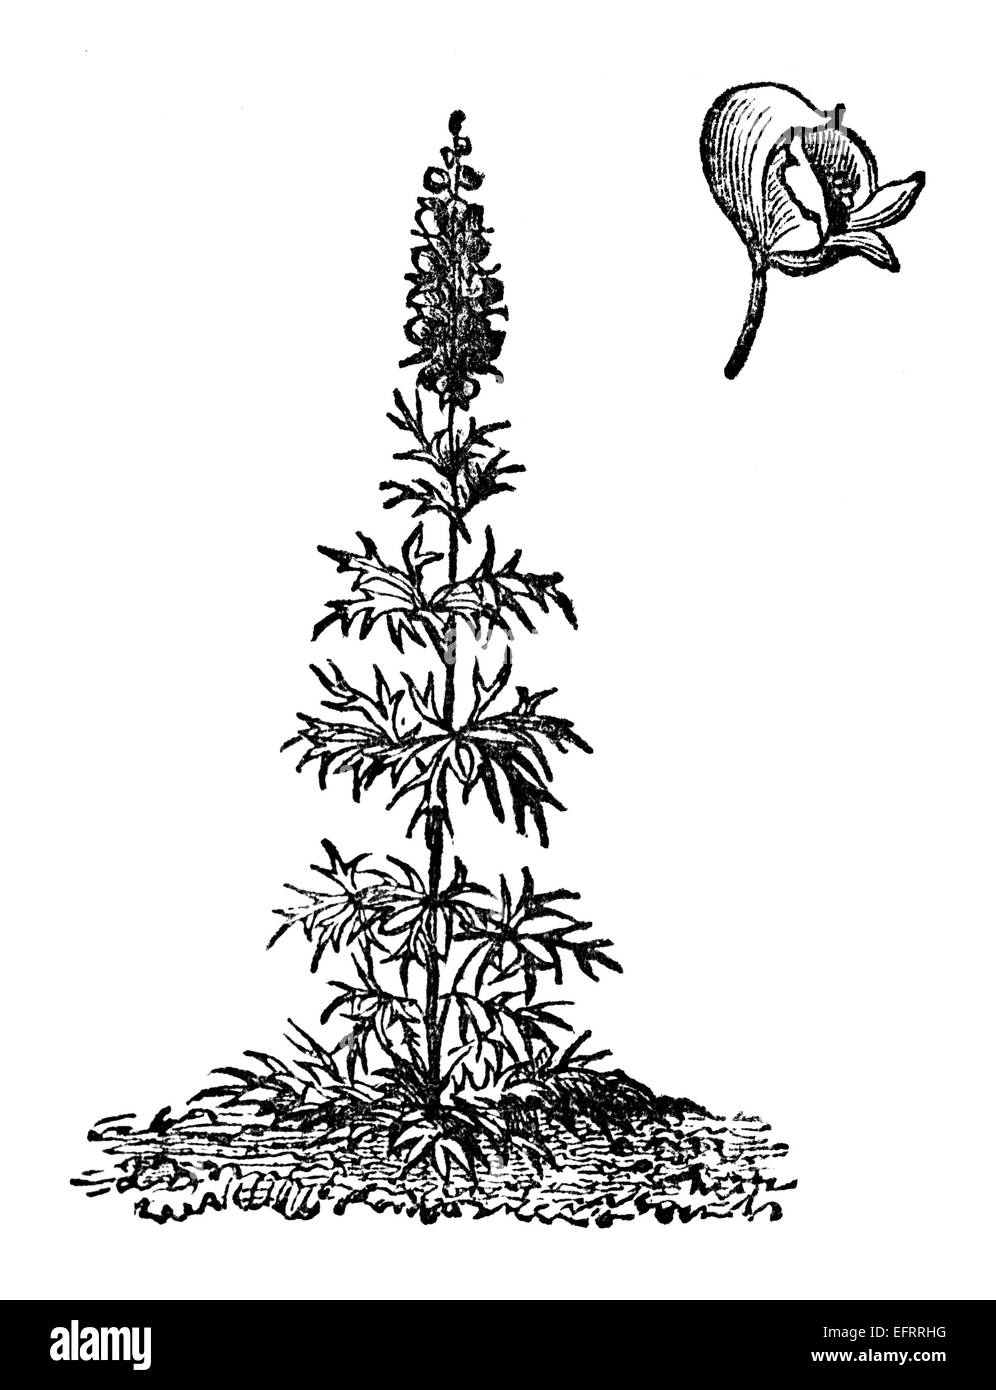 Victorian engraving of a monkshood flower, or aconite. Digitally restored image from a mid-19th century Encyclopaedia. Stock Photo